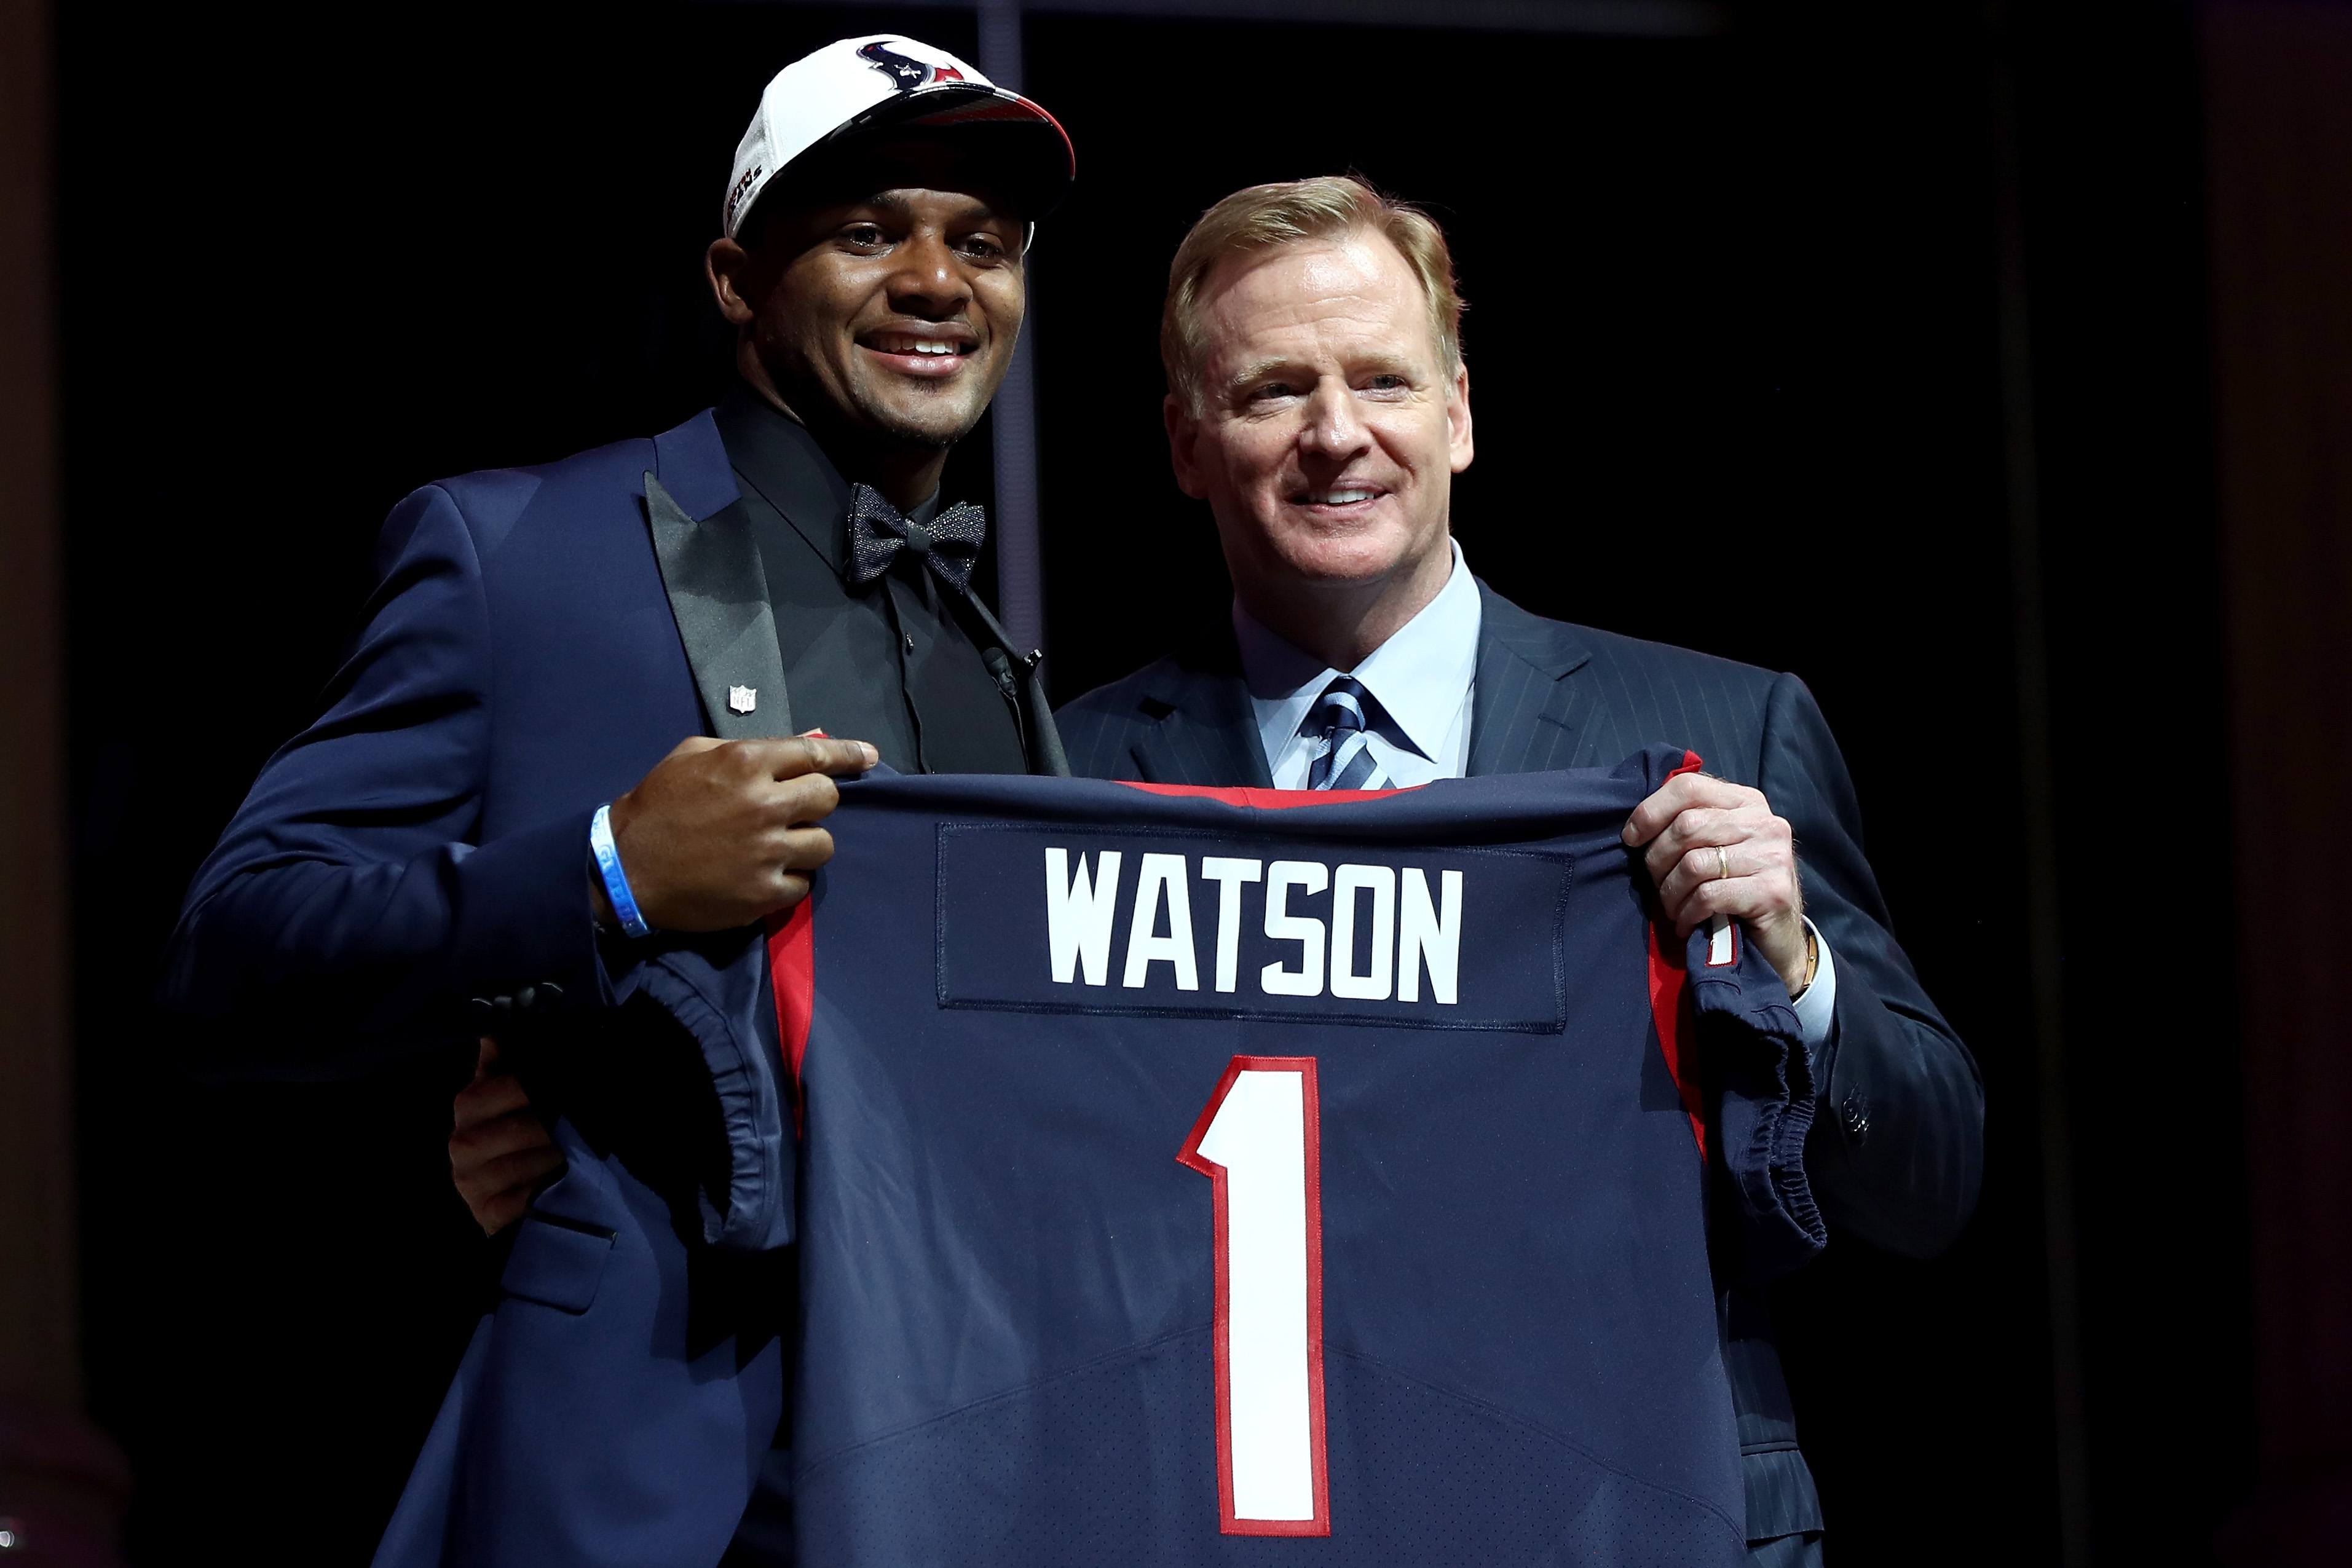 Deshaun Watson poses with NFL Commissioner Roger Goodell after being drafted by the Houston Texans.